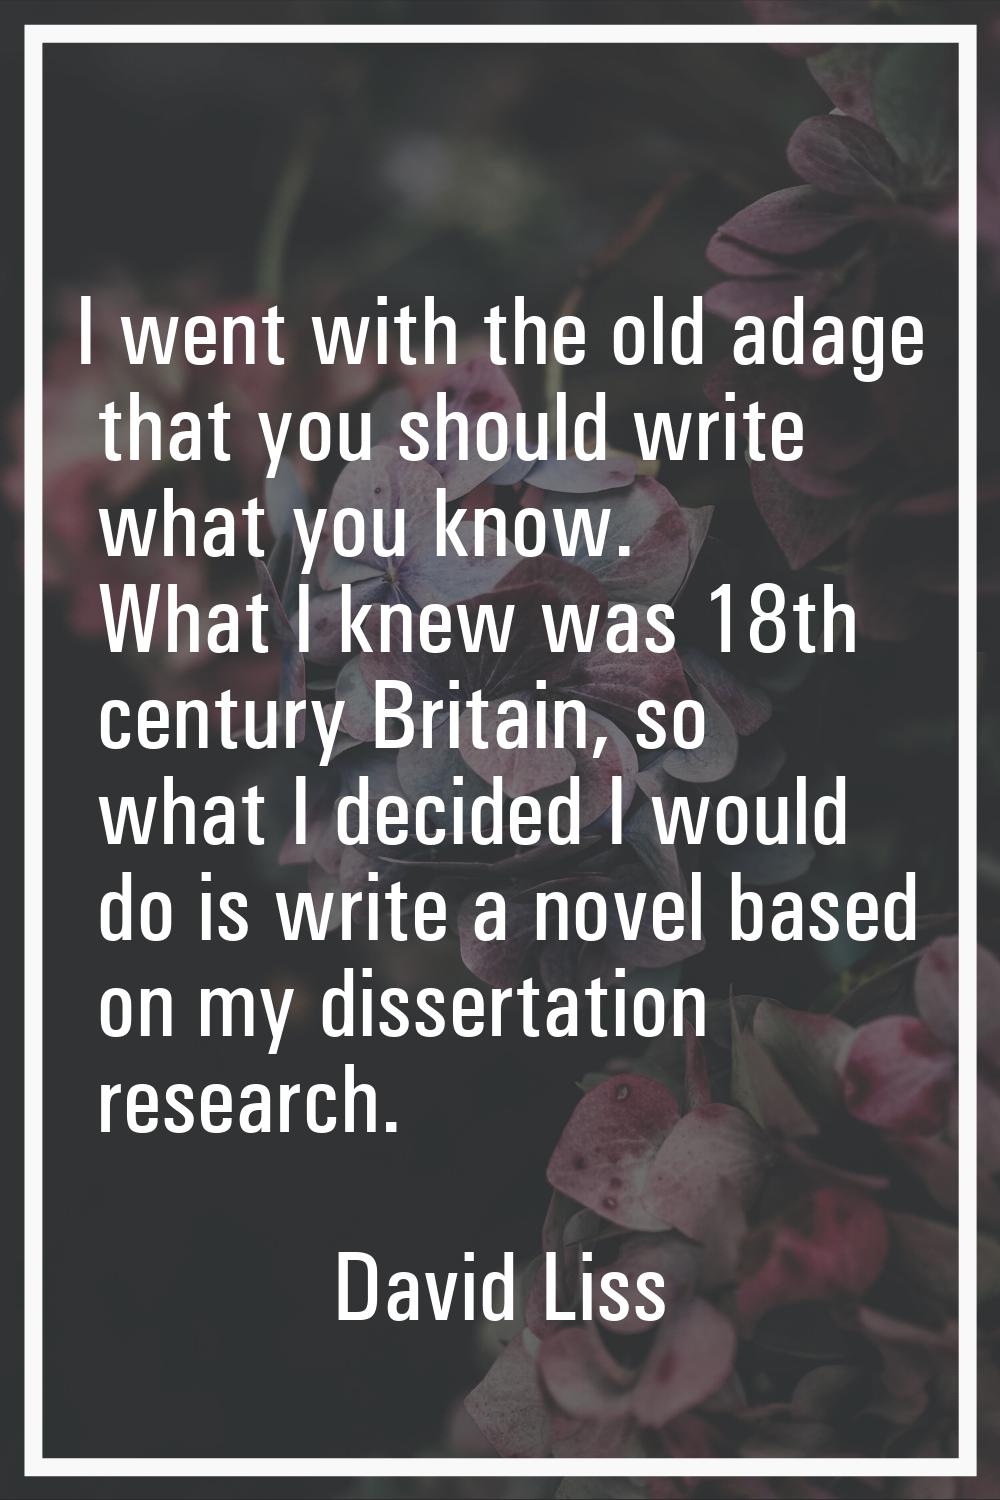 I went with the old adage that you should write what you know. What I knew was 18th century Britain